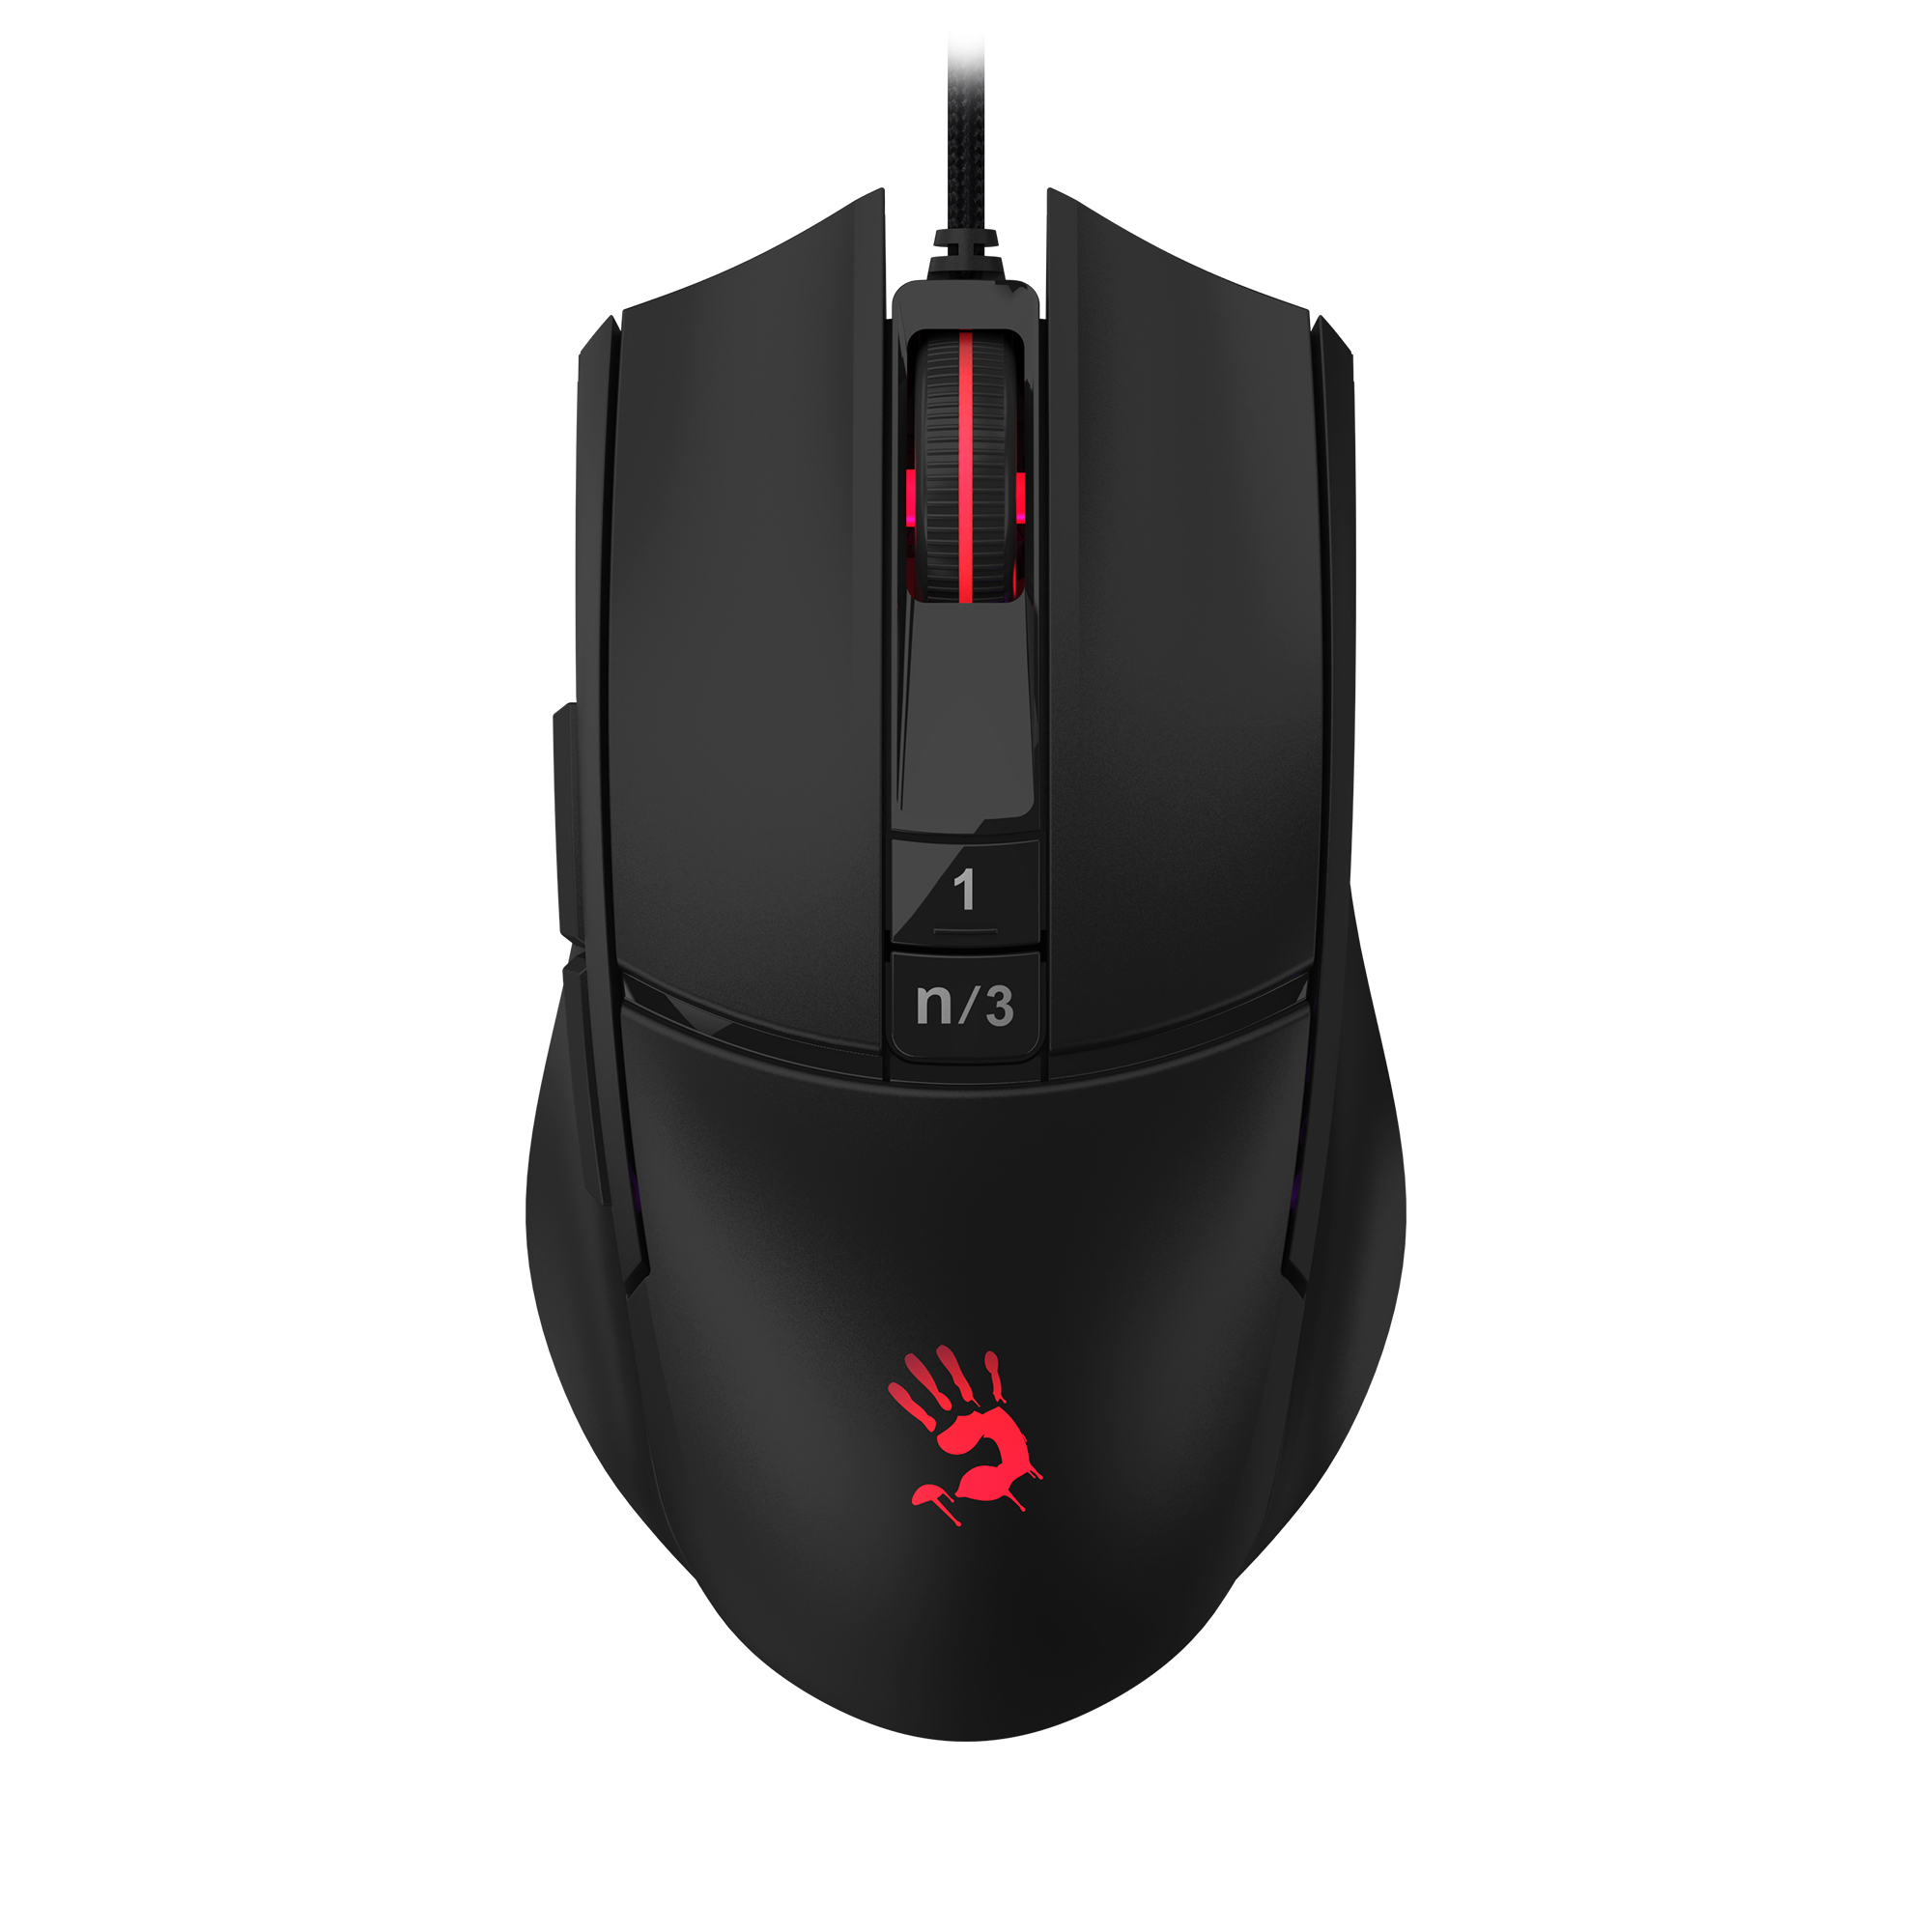 Rust eac blacklisted device bloody mouse фото 23